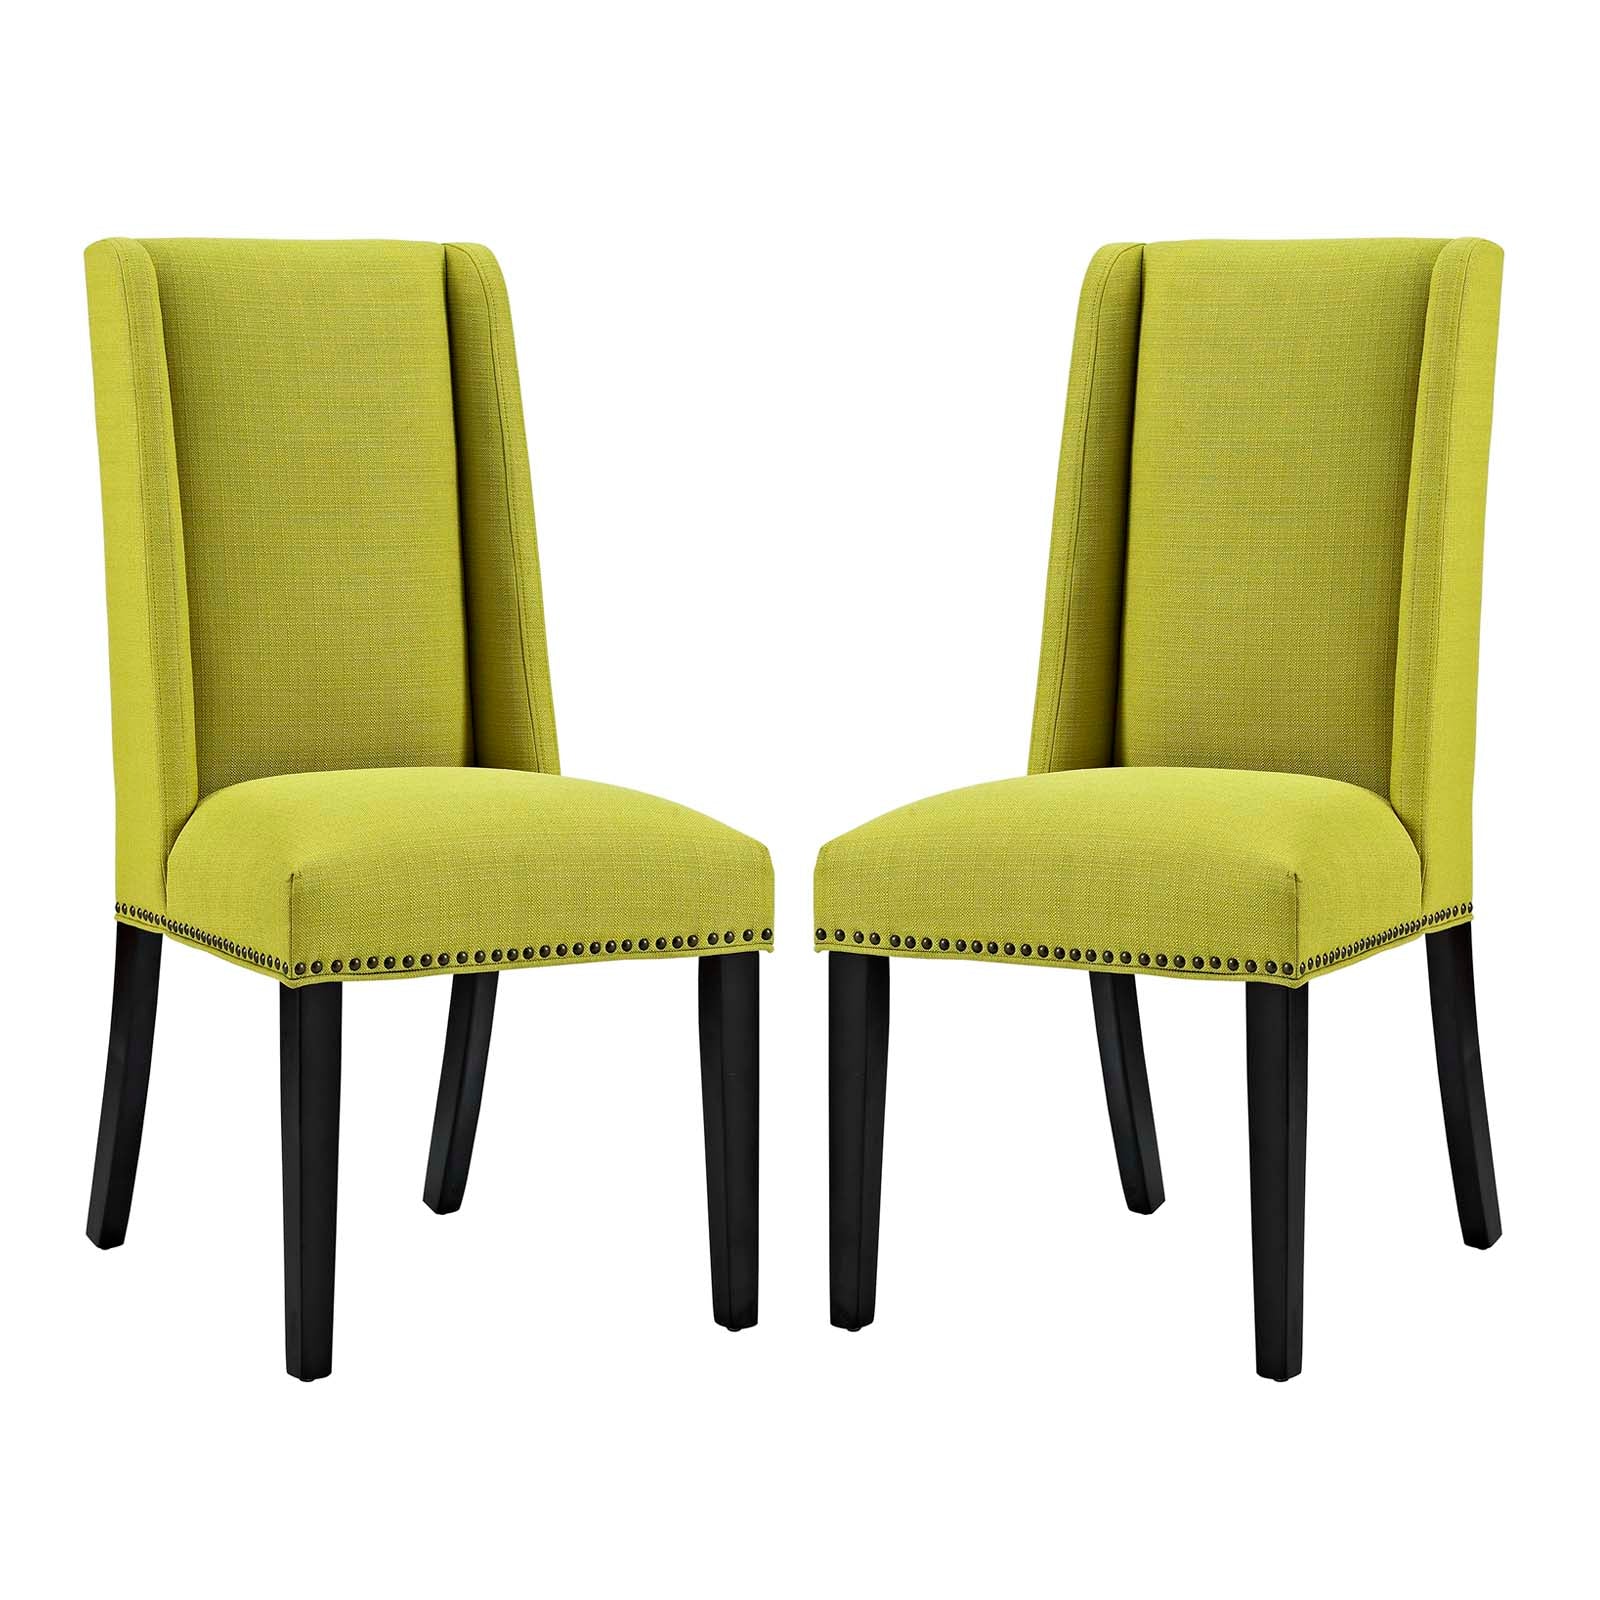 Baron Dining Chair Fabric Set of 2 - East Shore Modern Home Furnishings